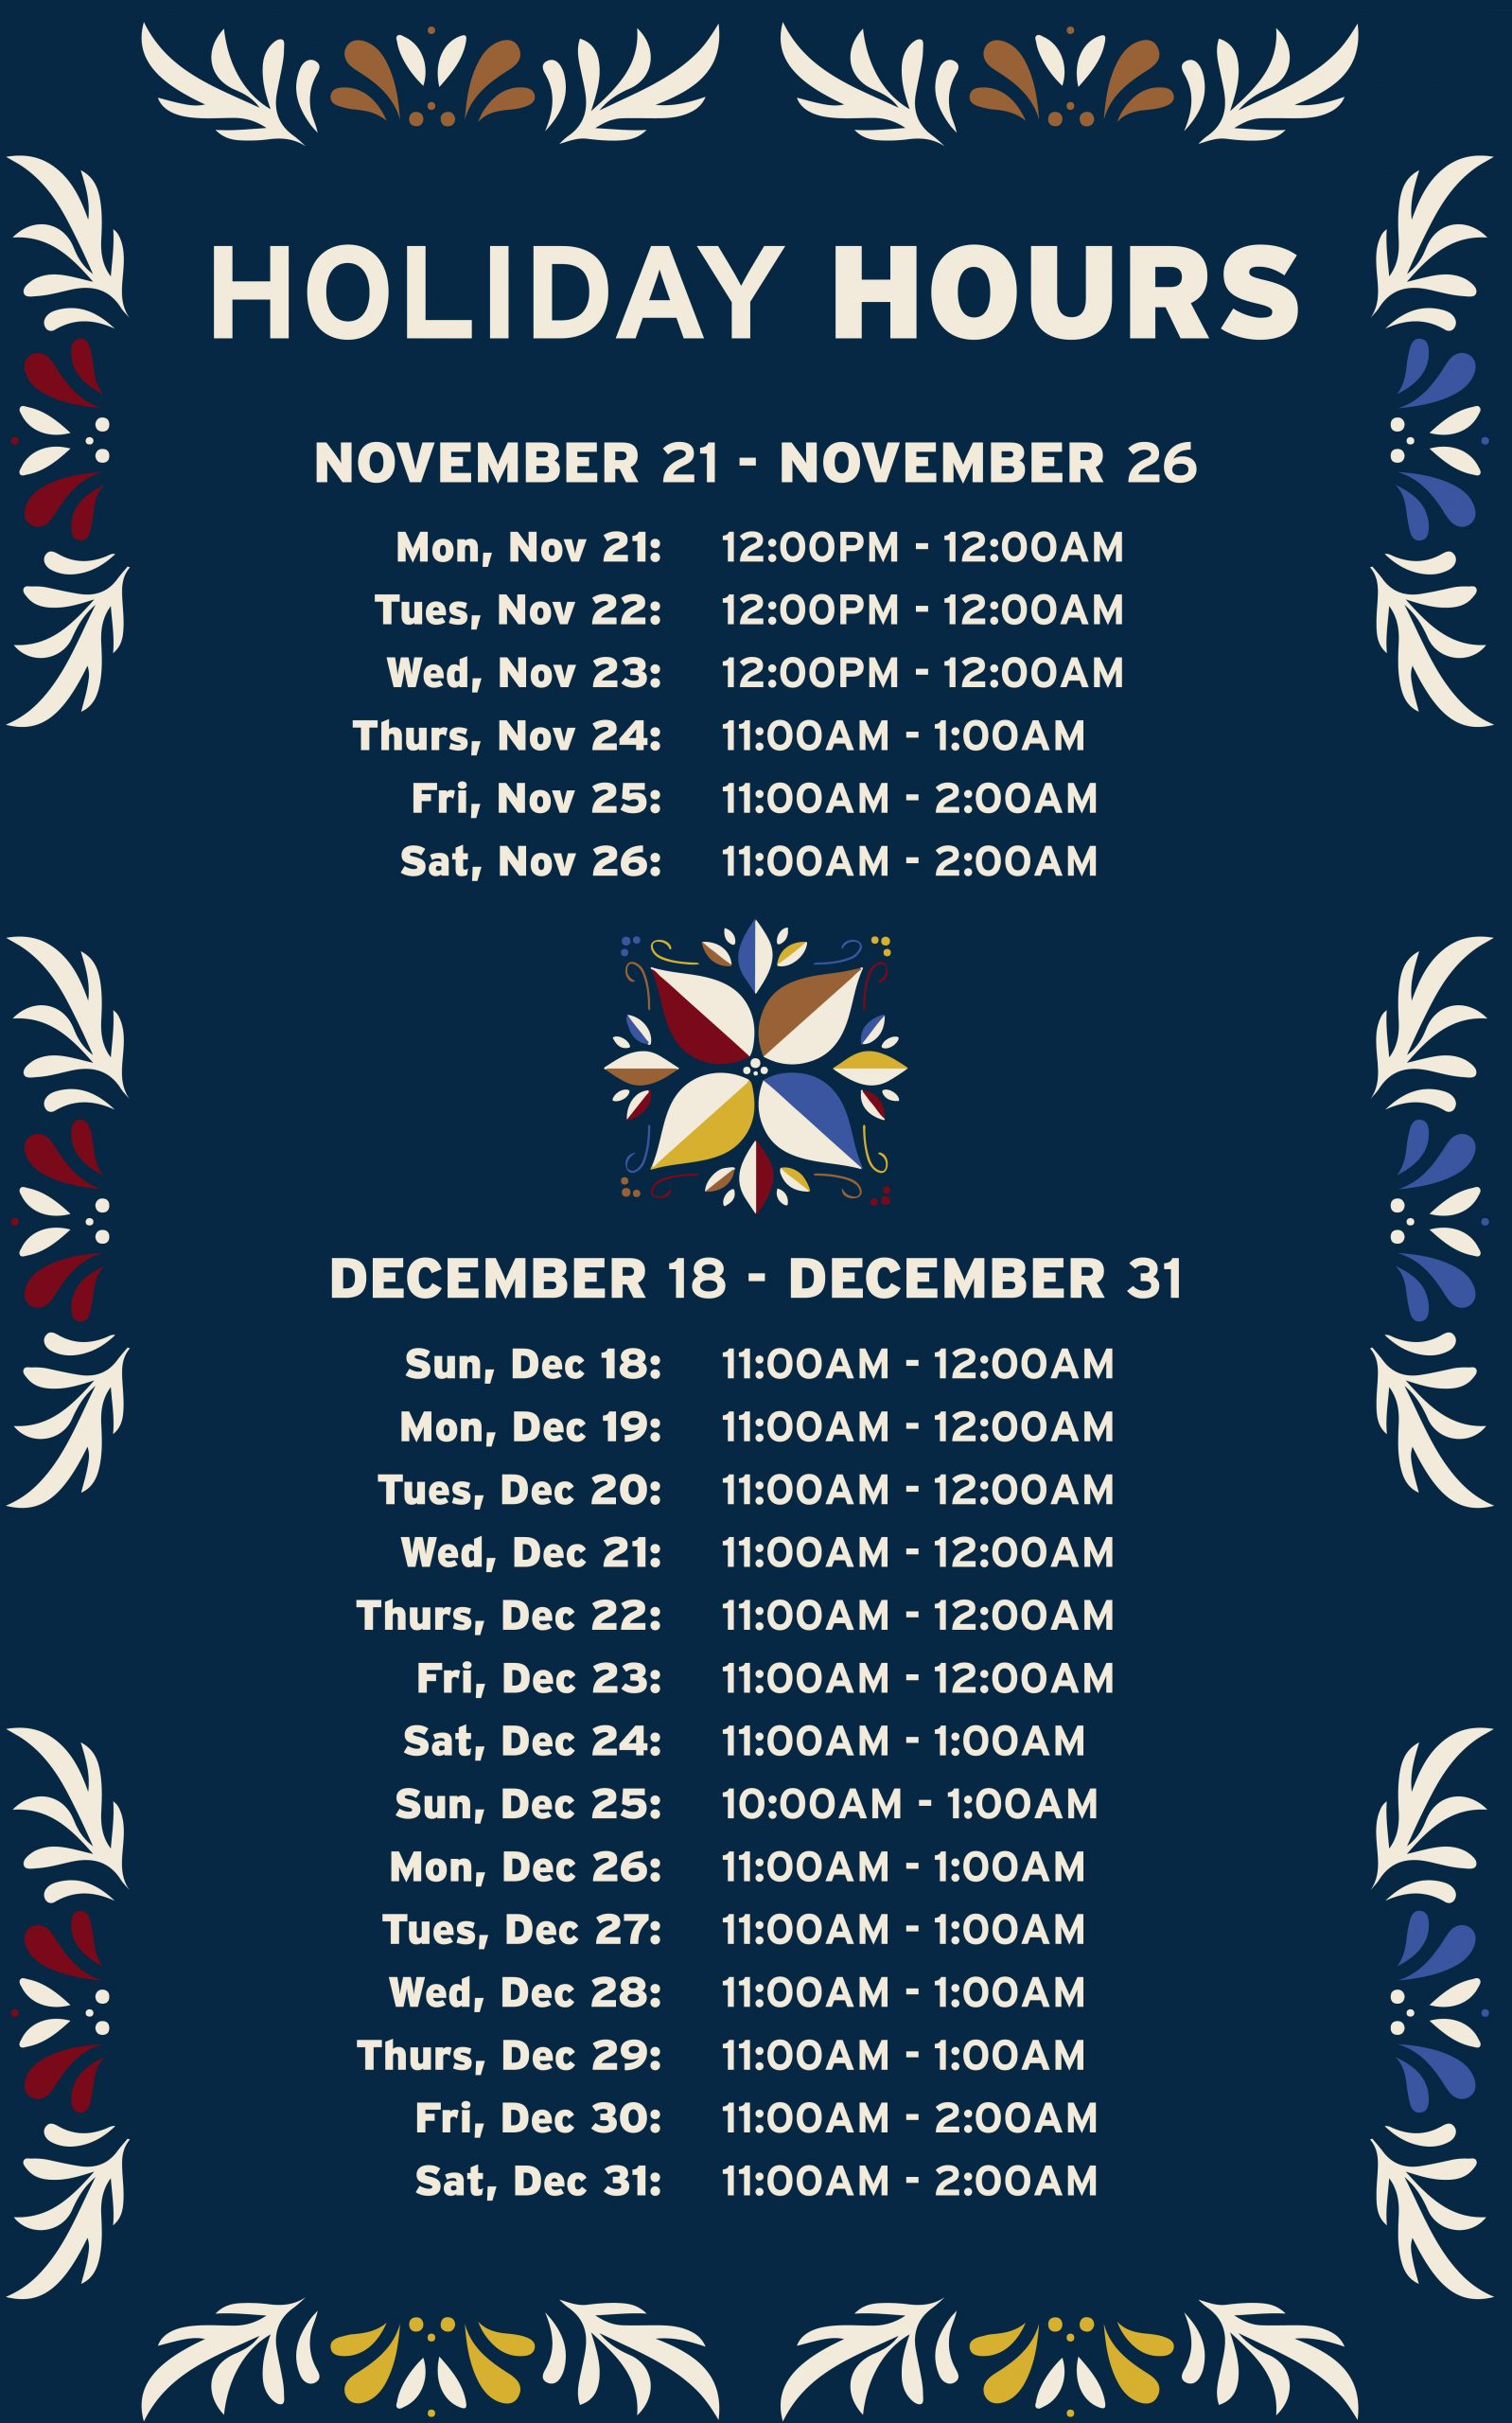 Red Hawk Holiday Hours 2022